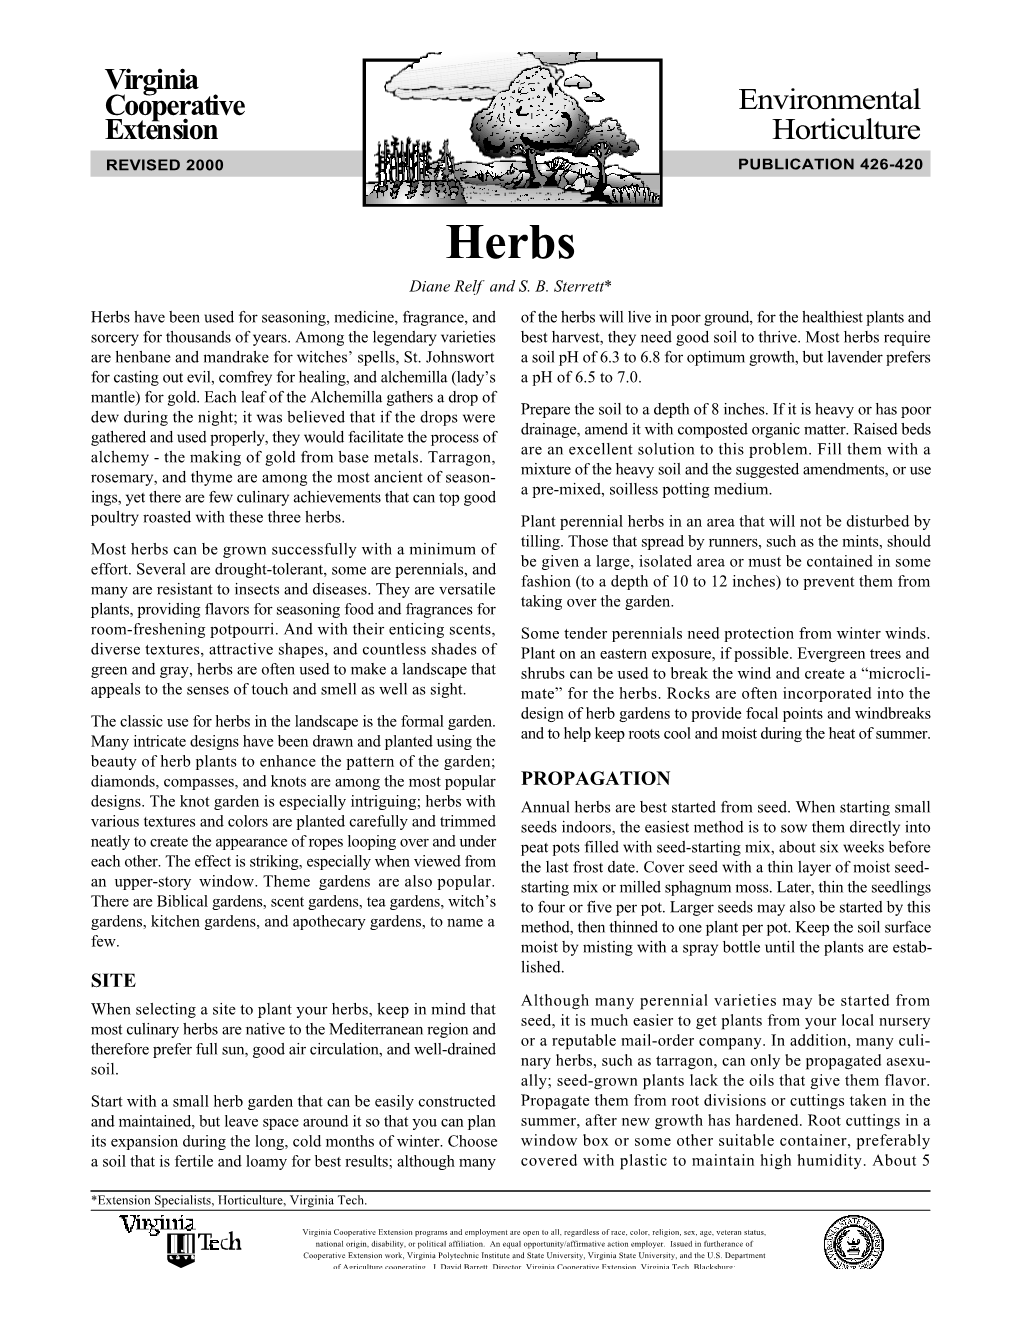 Herbs Diane Relf and S